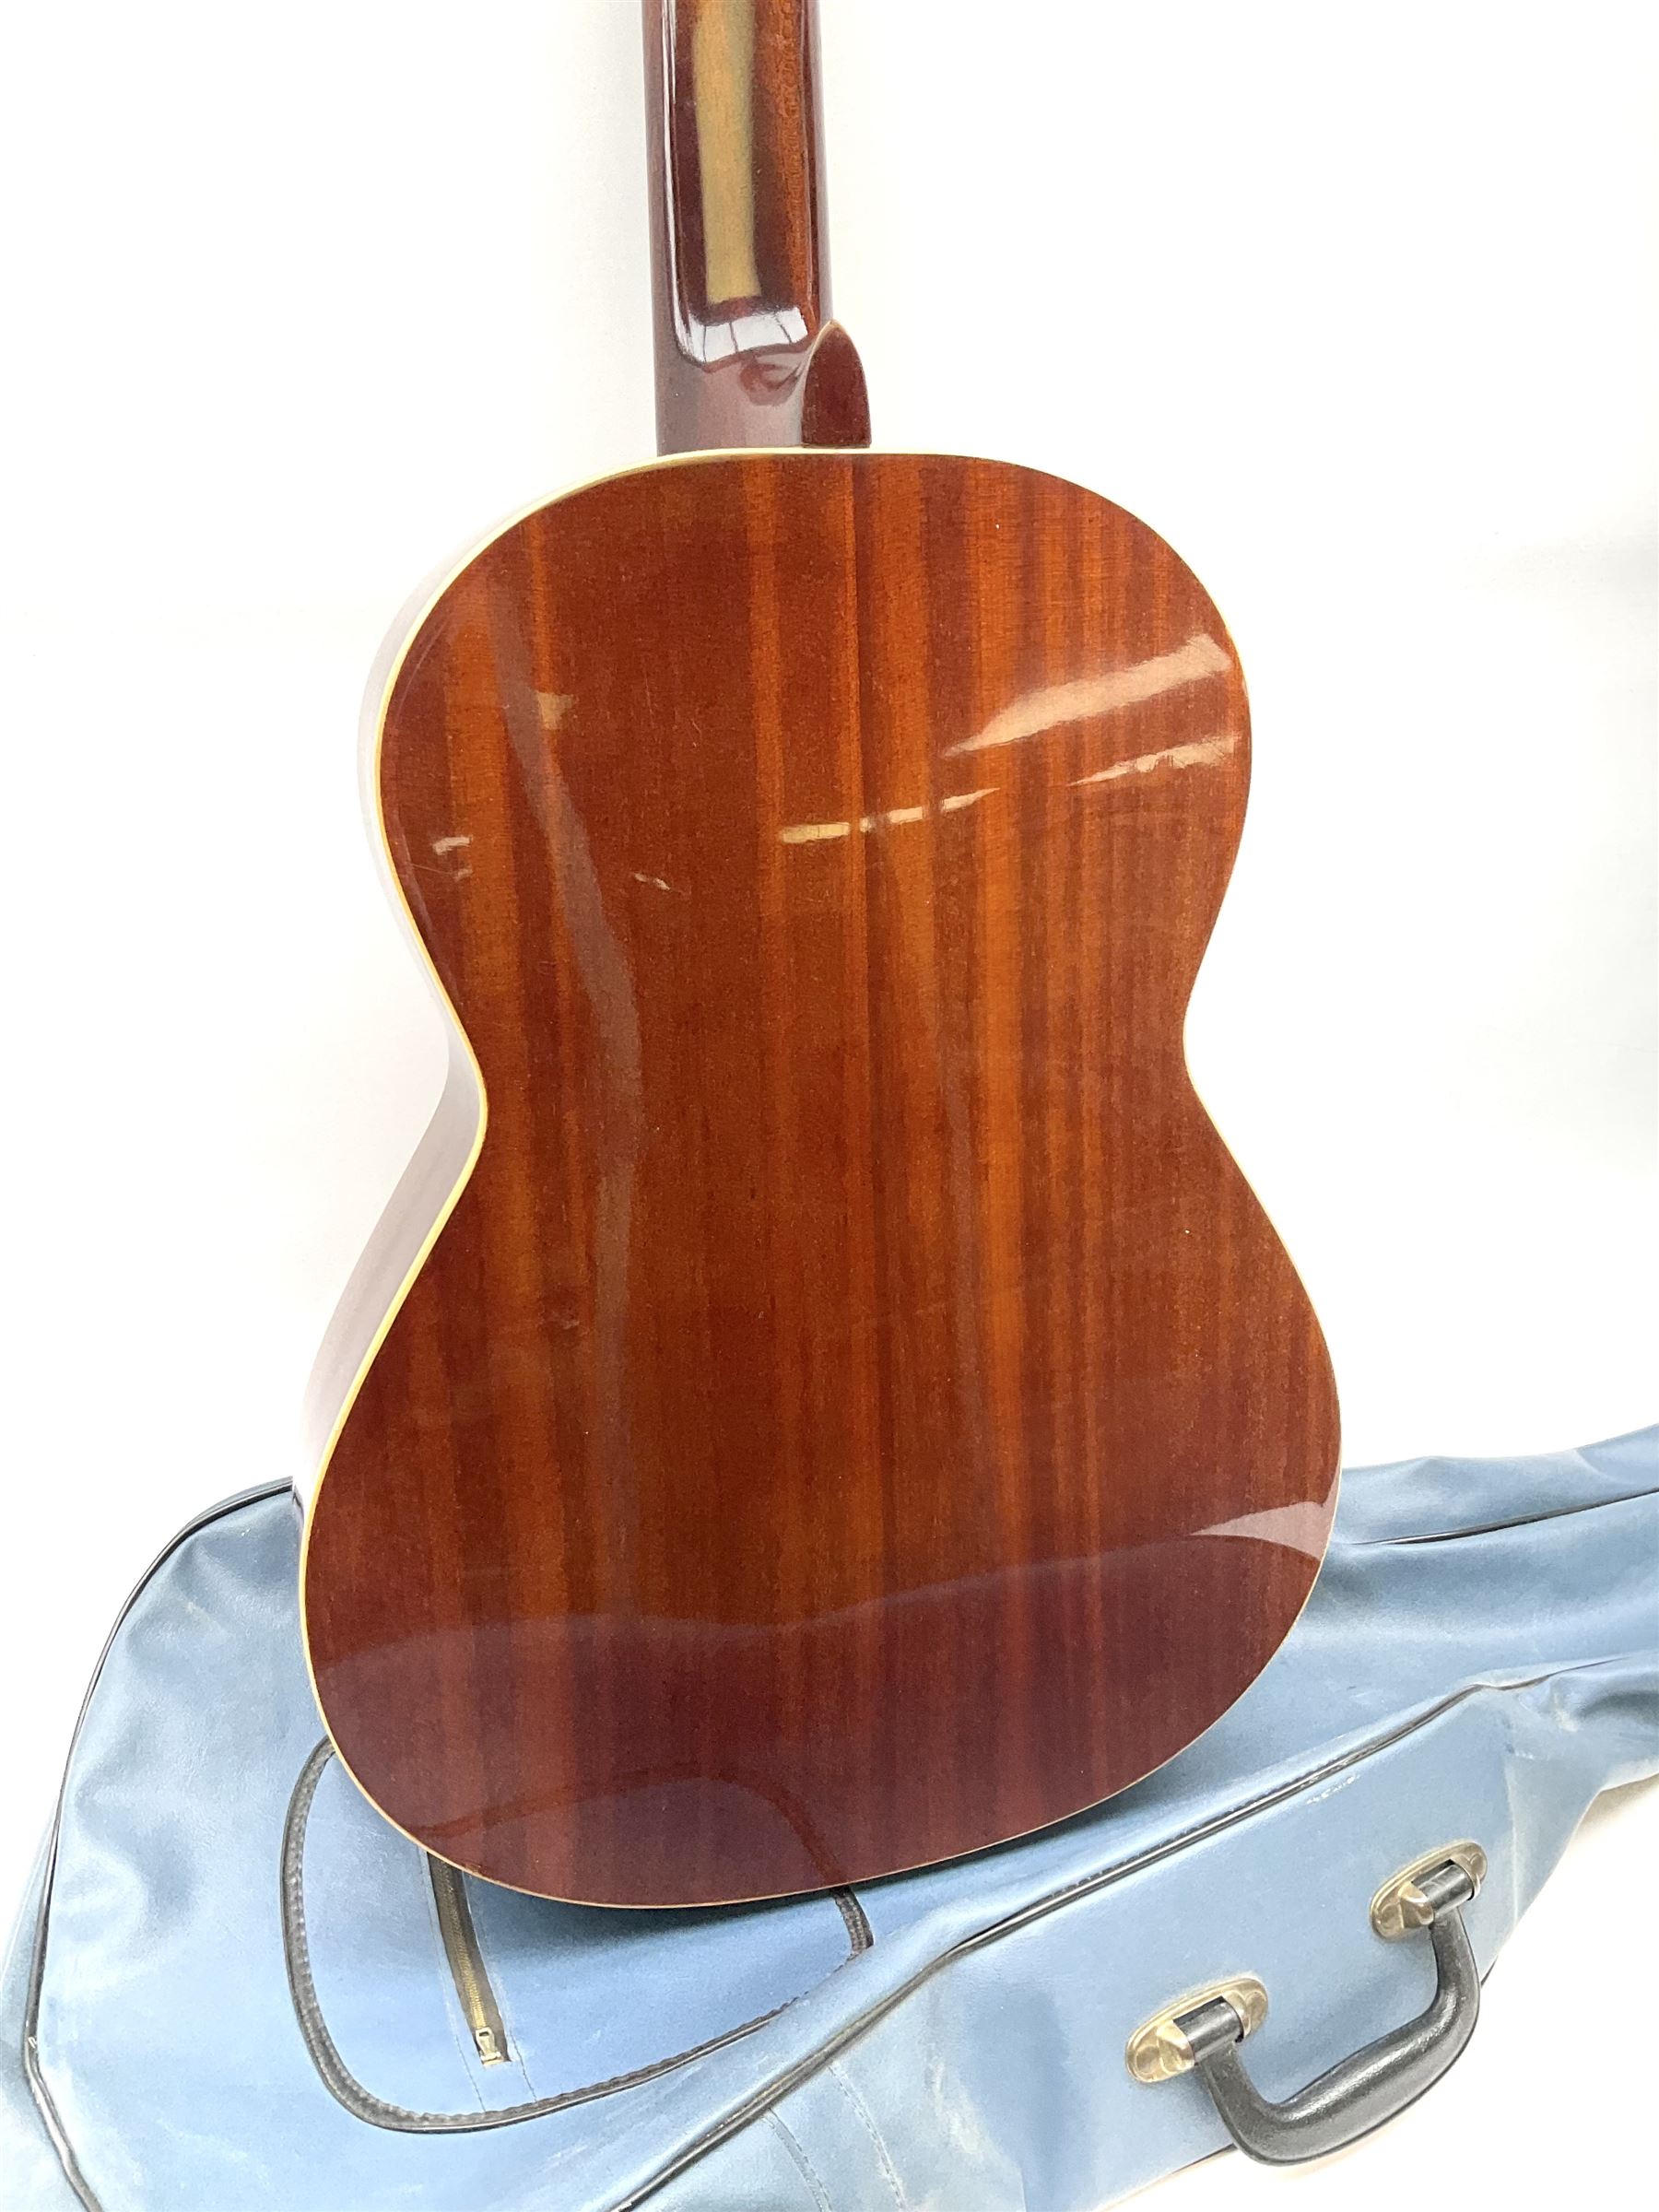 Spanish Concert Grande acoustic guitar with mahogany back and ribs and spruce top L100cm; in soft ca - Image 8 of 17